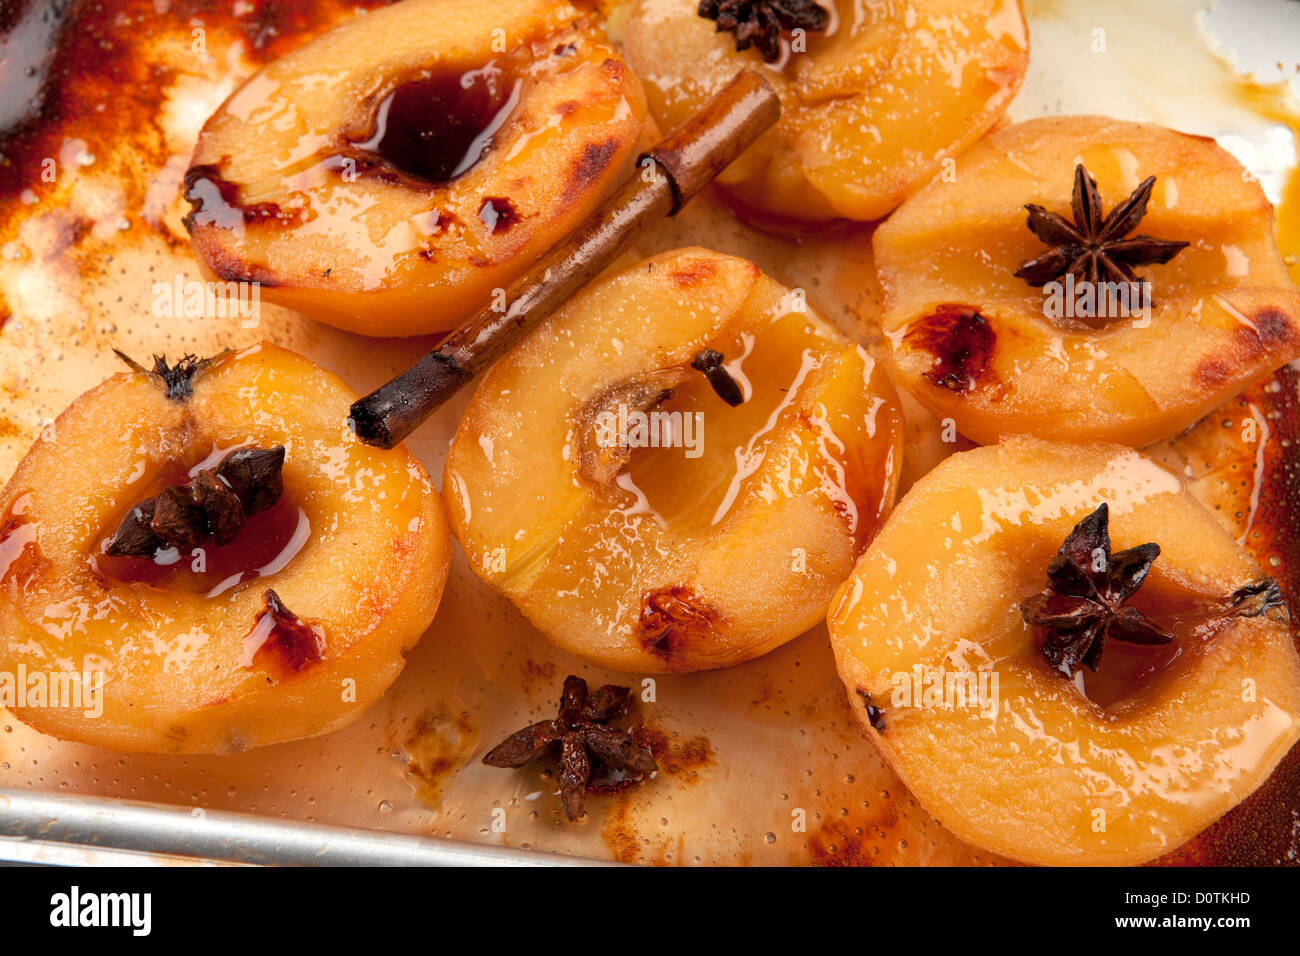 Baked quince Stock Photo